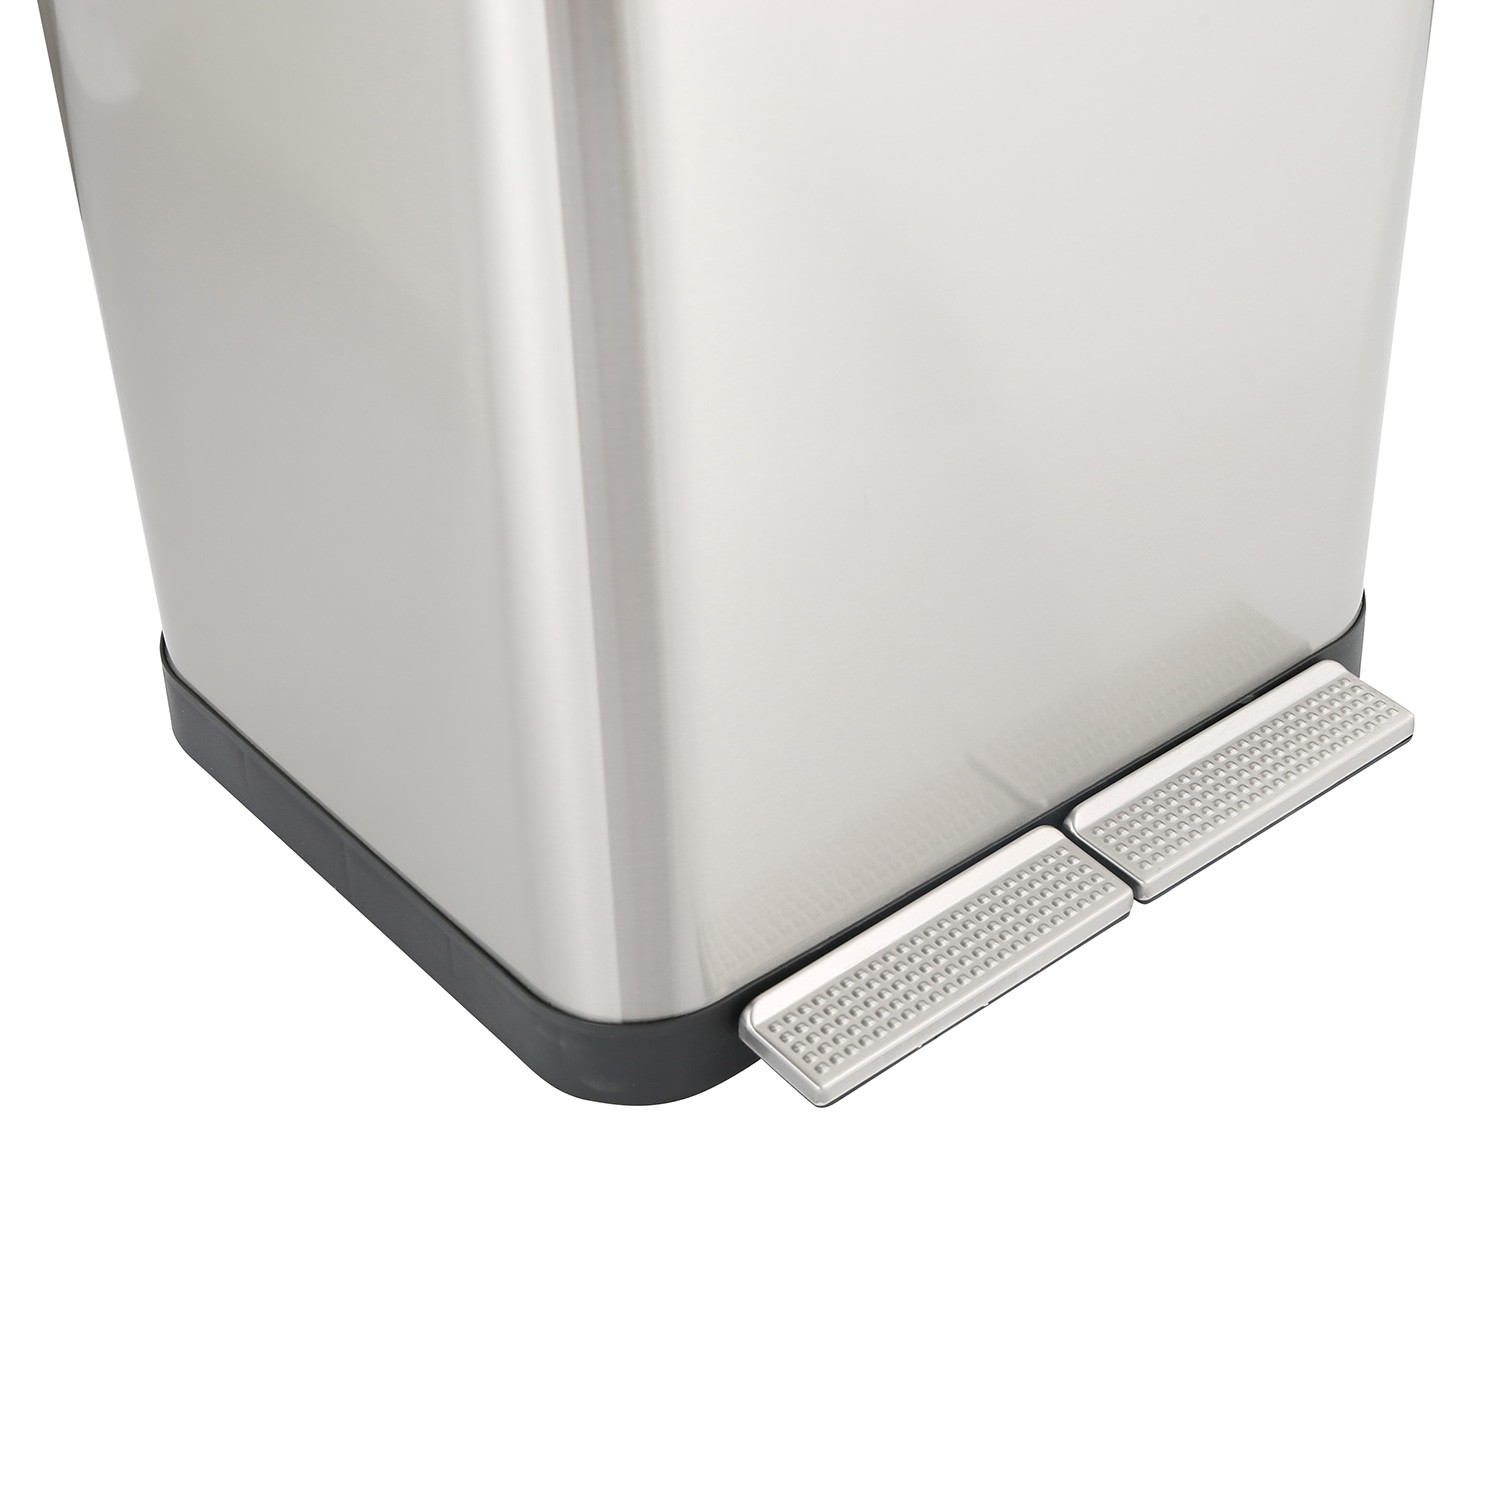 Dual Compartment Stainless Steel Recycle Garbage Bin 15L+15L (KL-105)